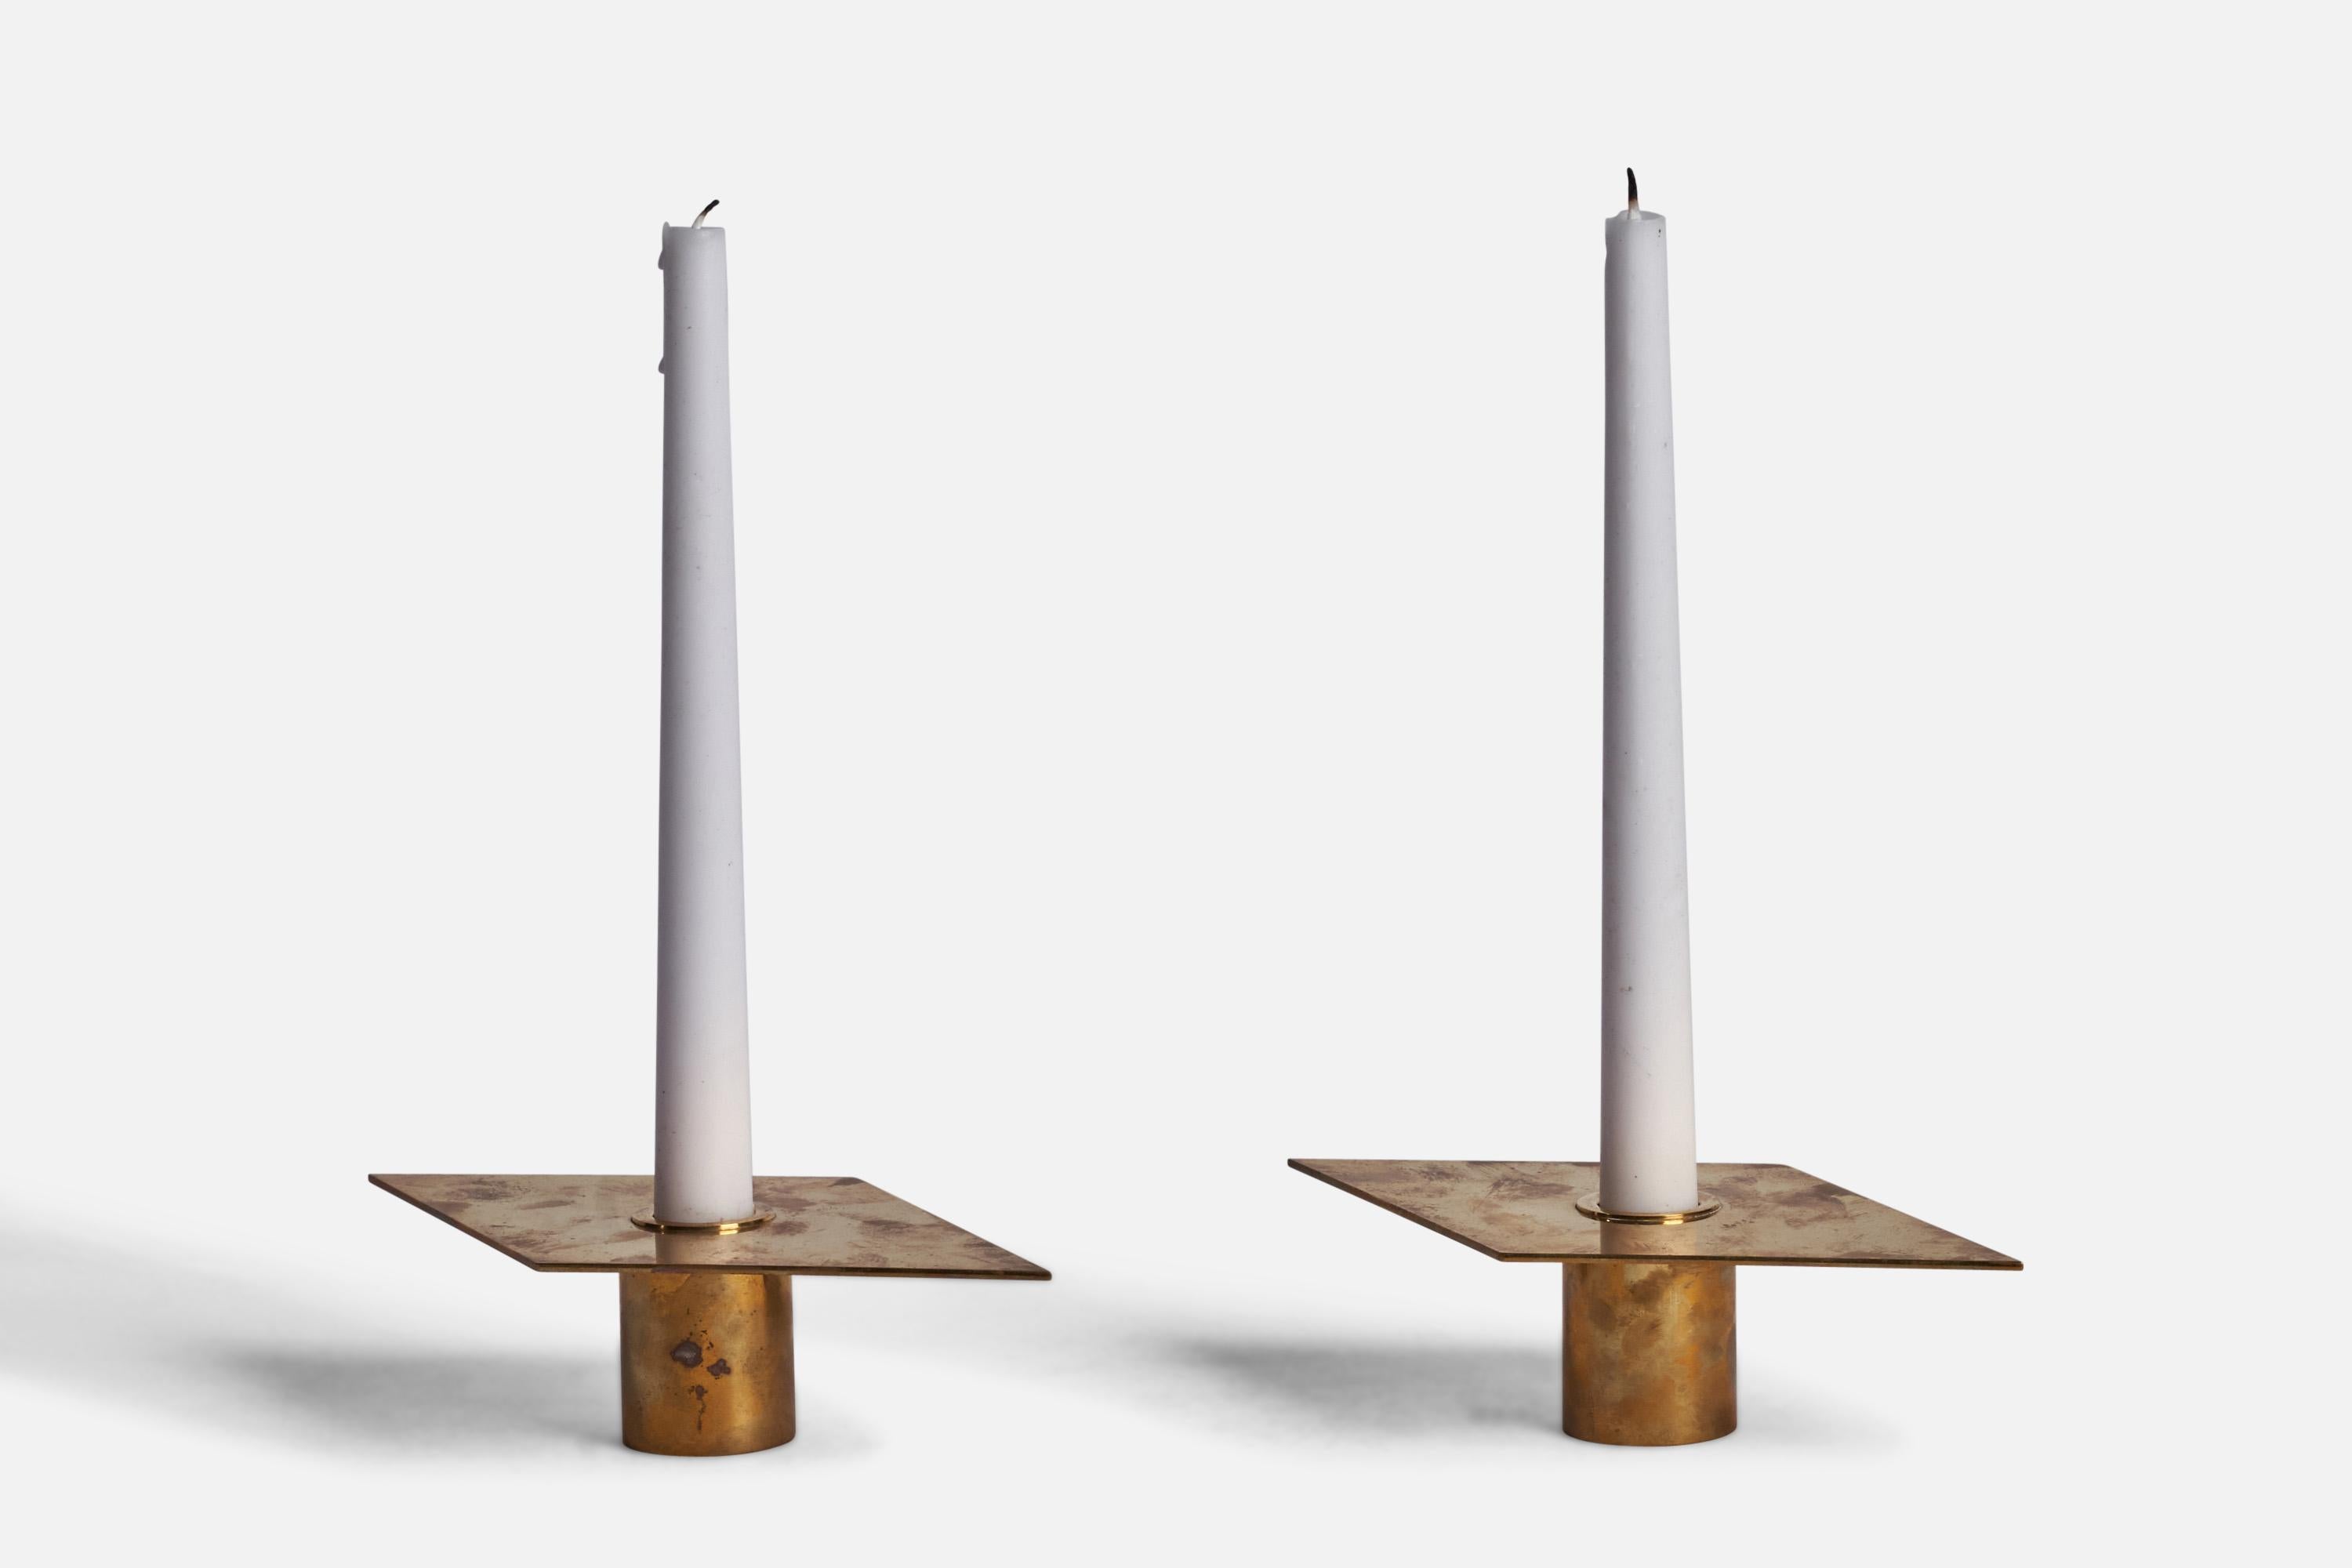 A pair of brass candlesticks designed and produced by Sigurd Persson, Sweden, 1950s.

Fits 0.8” diameter candles